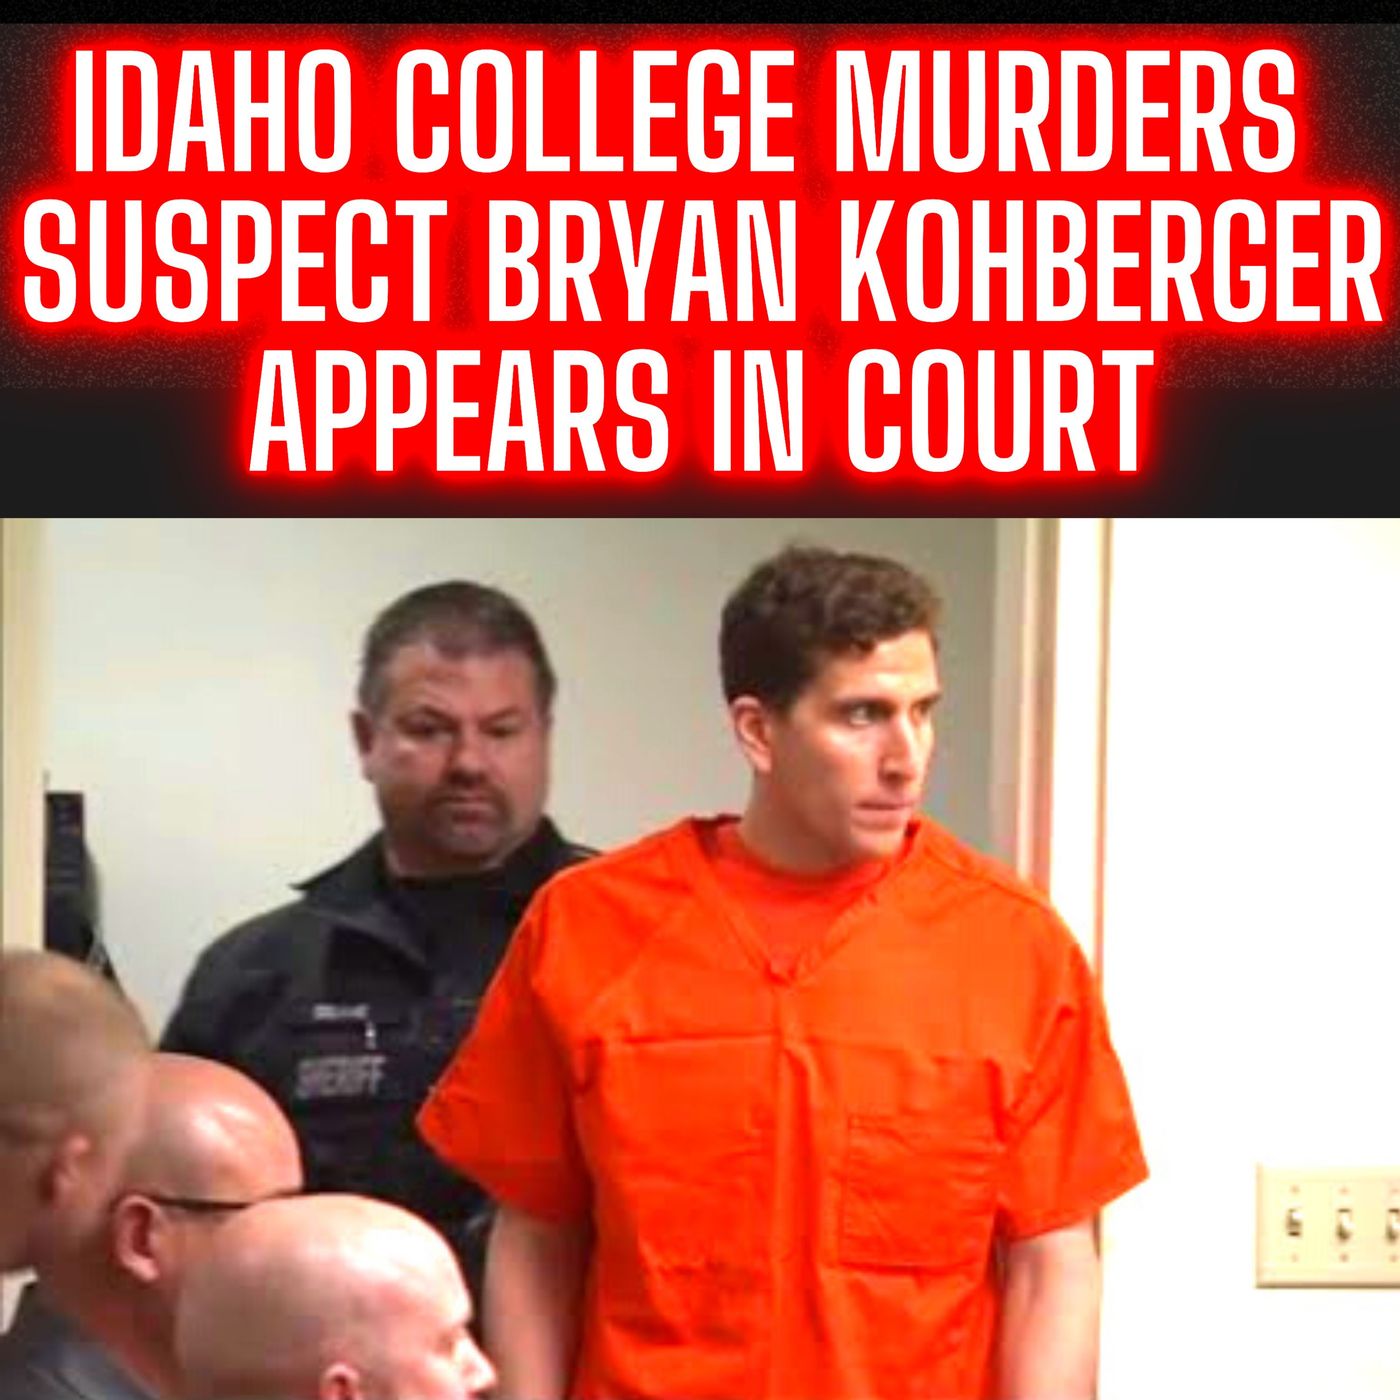 Idaho College Murders Suspect Bryan Kohberger Appears In Court Full Hearing 1553